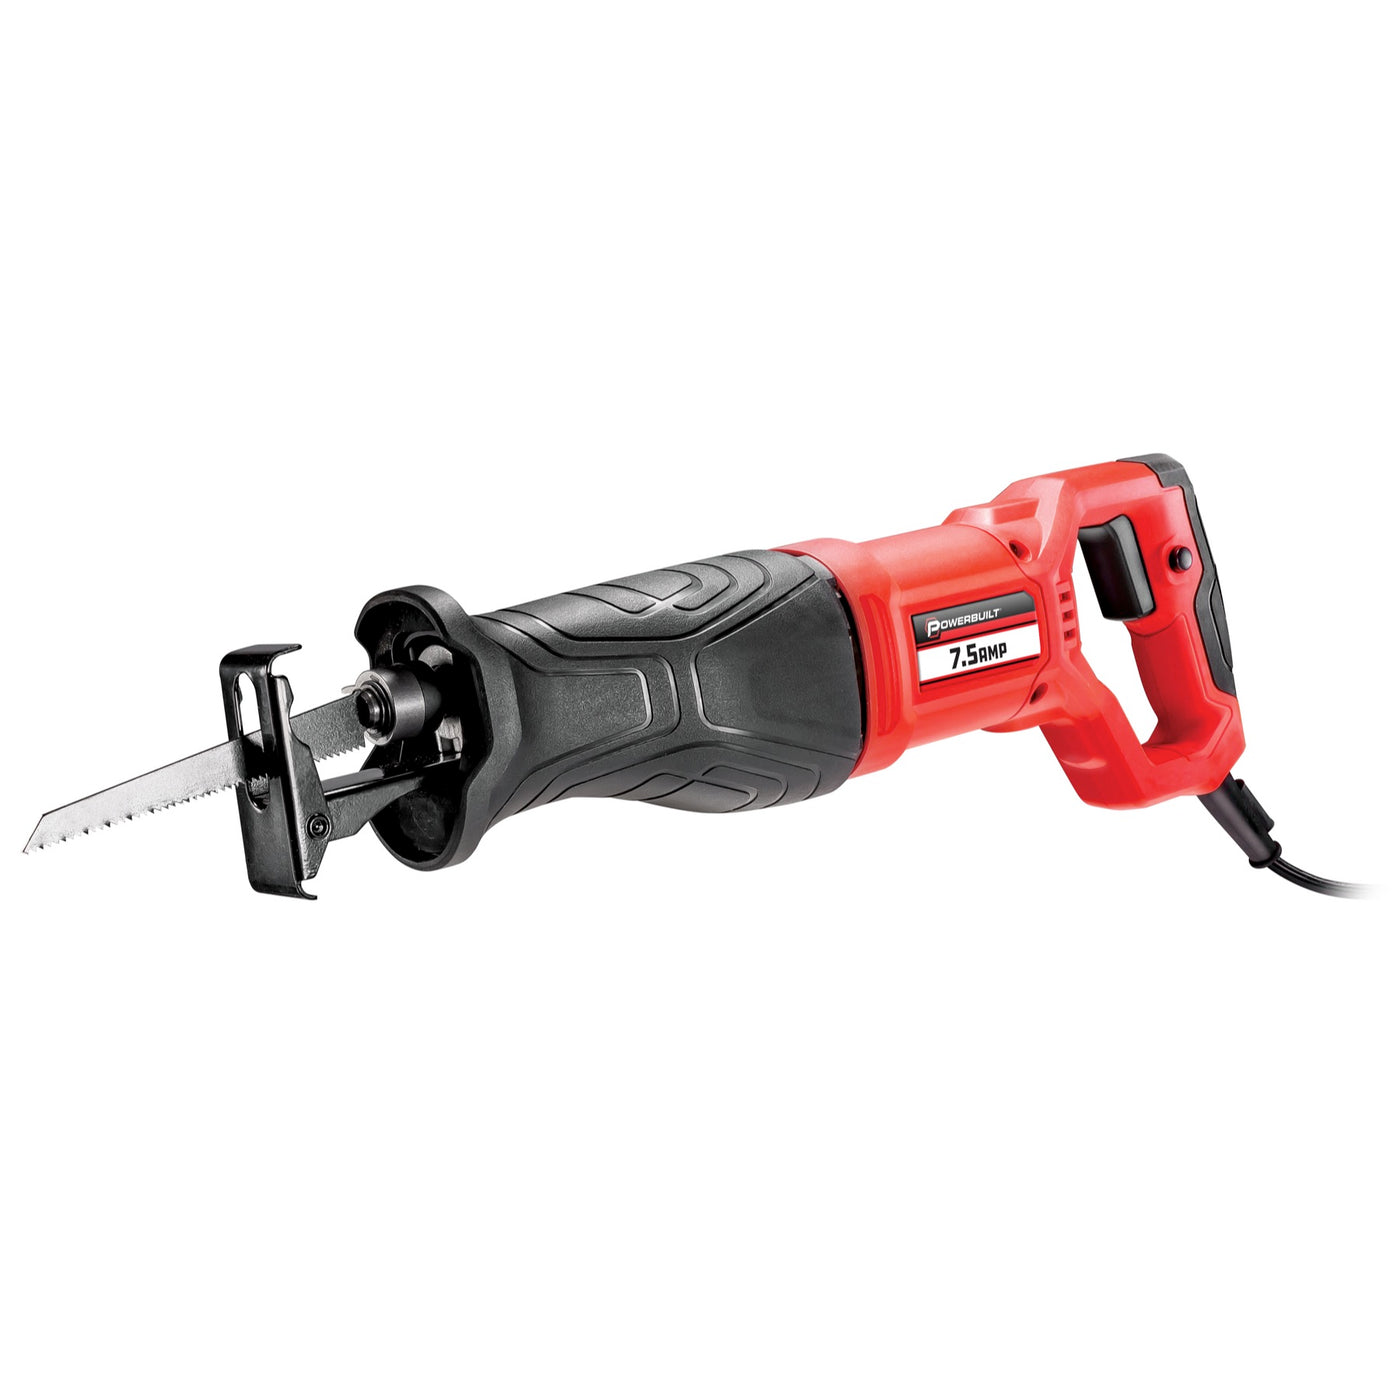 7.5 Amp Reciprocating Saw on Sale, SAVE 31%